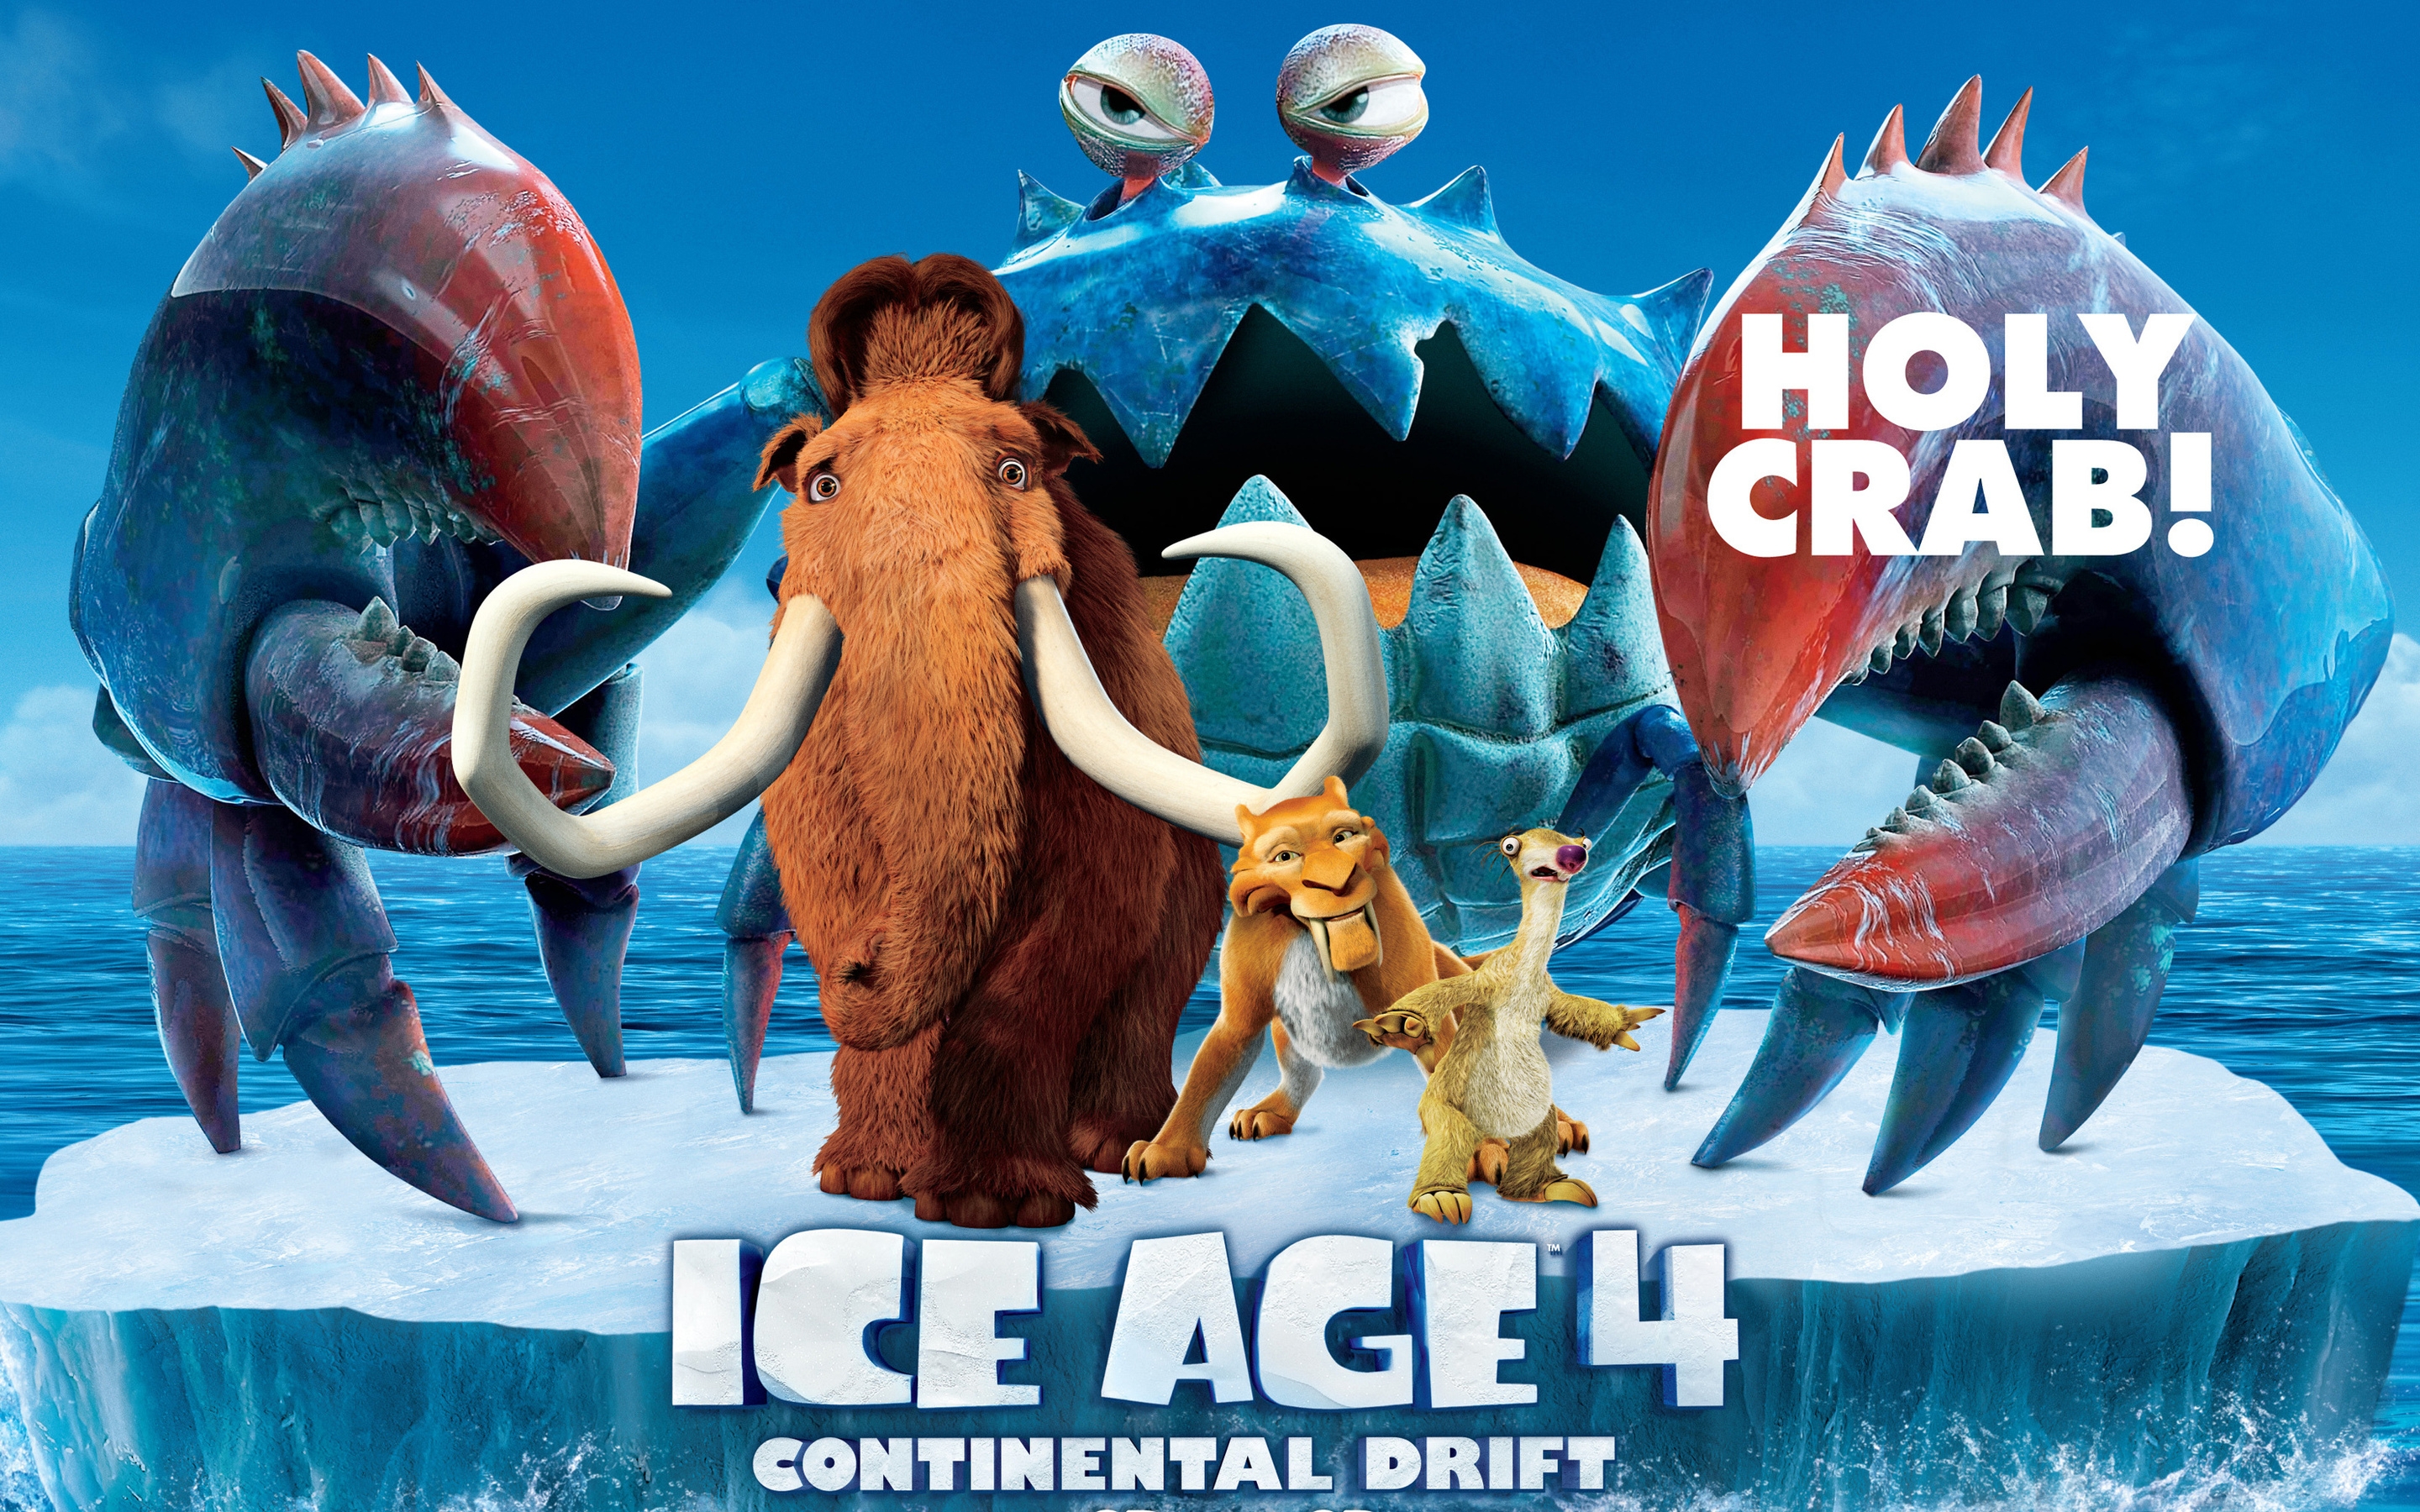 Ice Age 4 Holy Crab for 2880 x 1800 Retina Display resolution